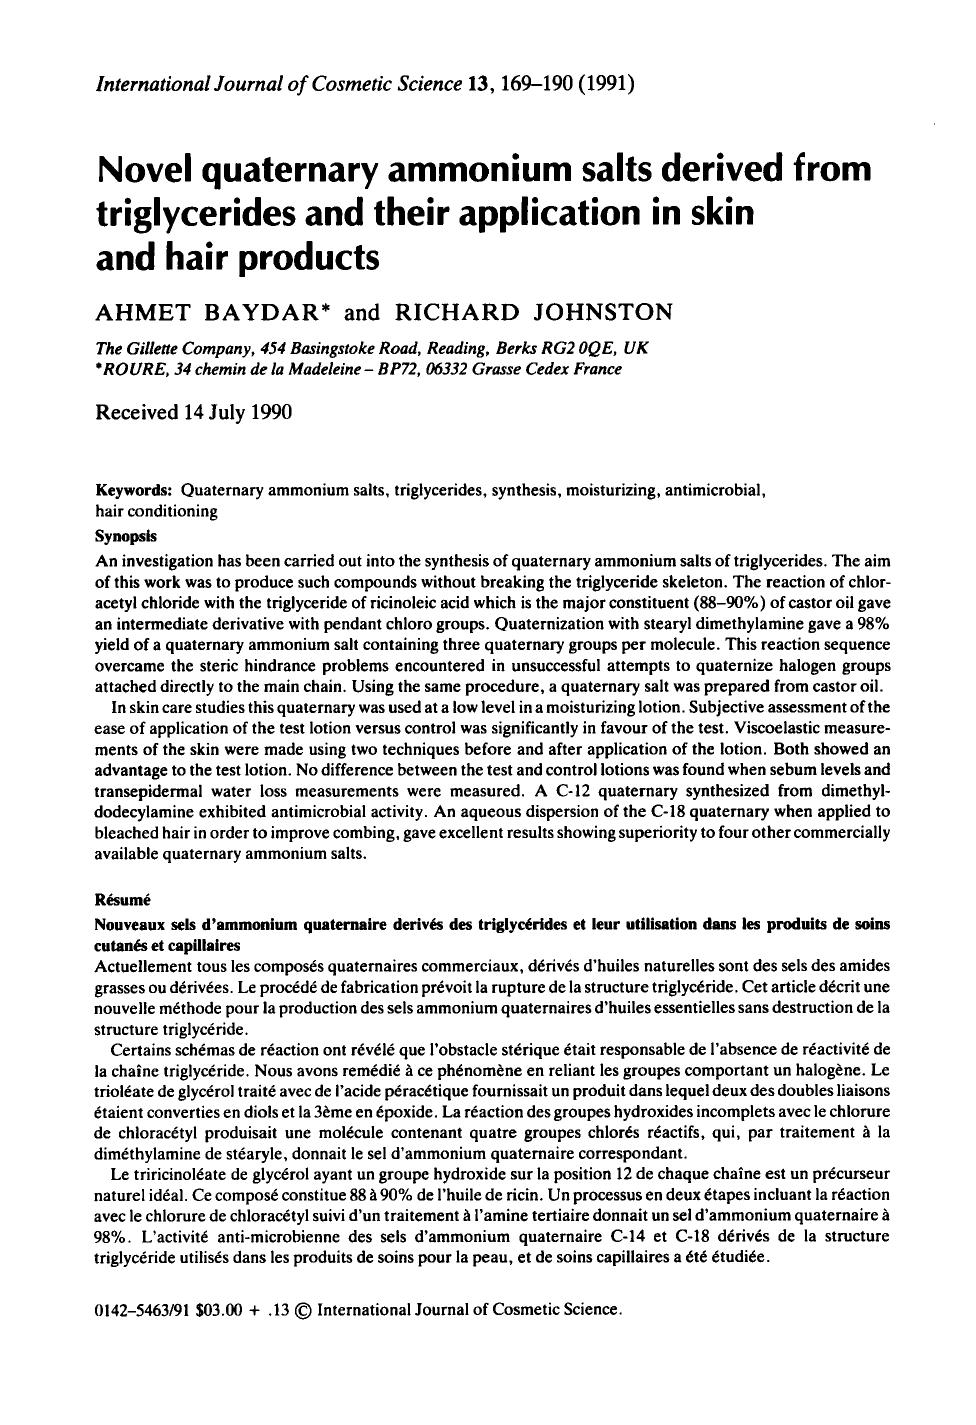 Novel quaternary ammonium salts derived from triglycerides and their application in skin and hair products by Unknown